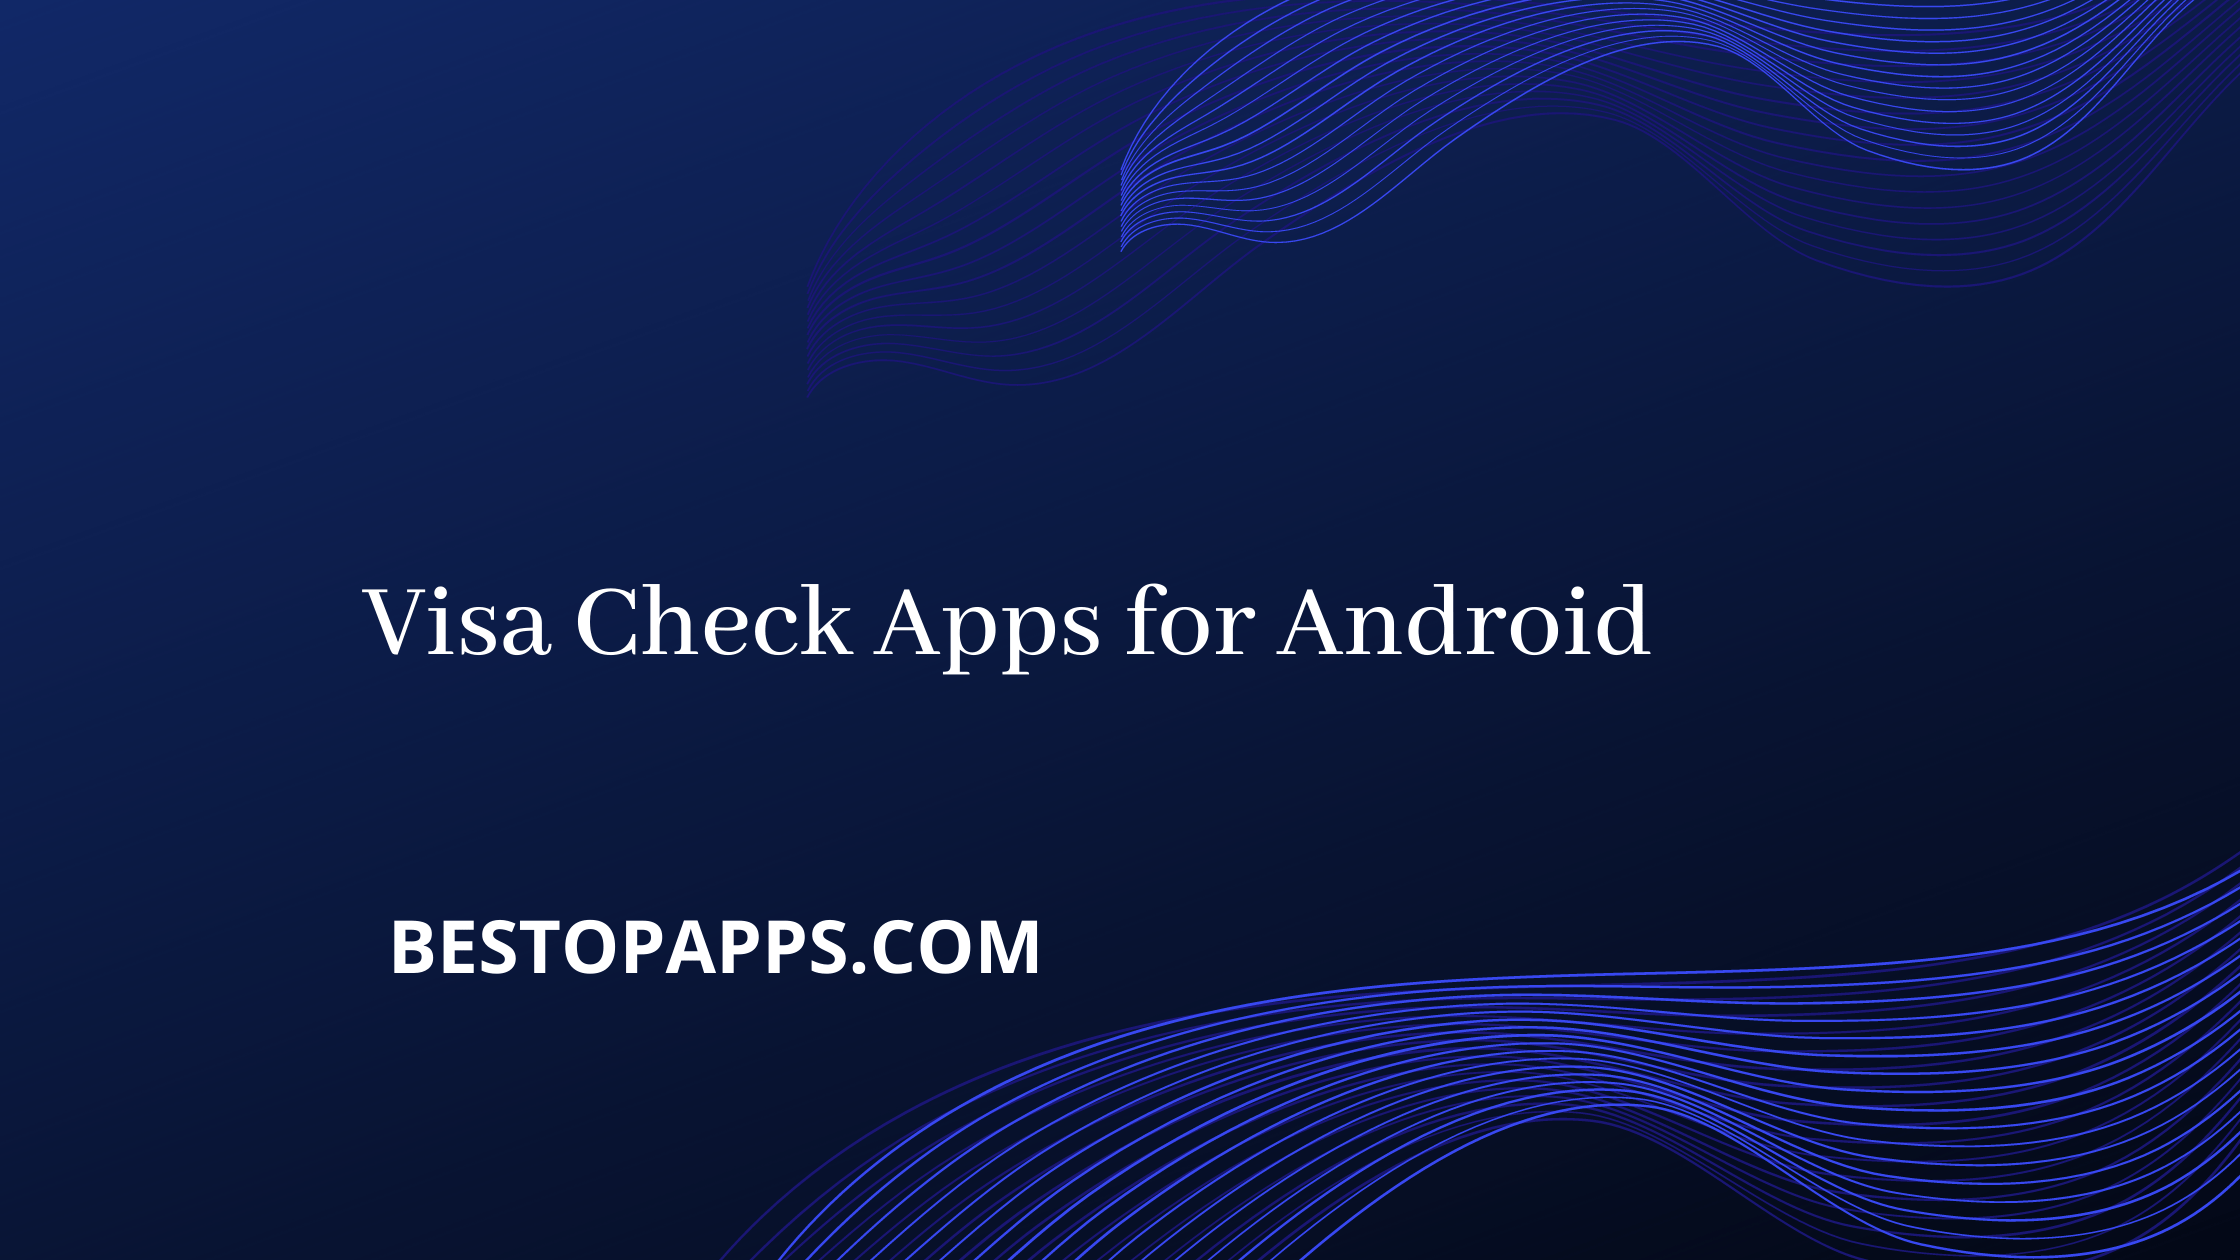 Visa Check Apps for Android